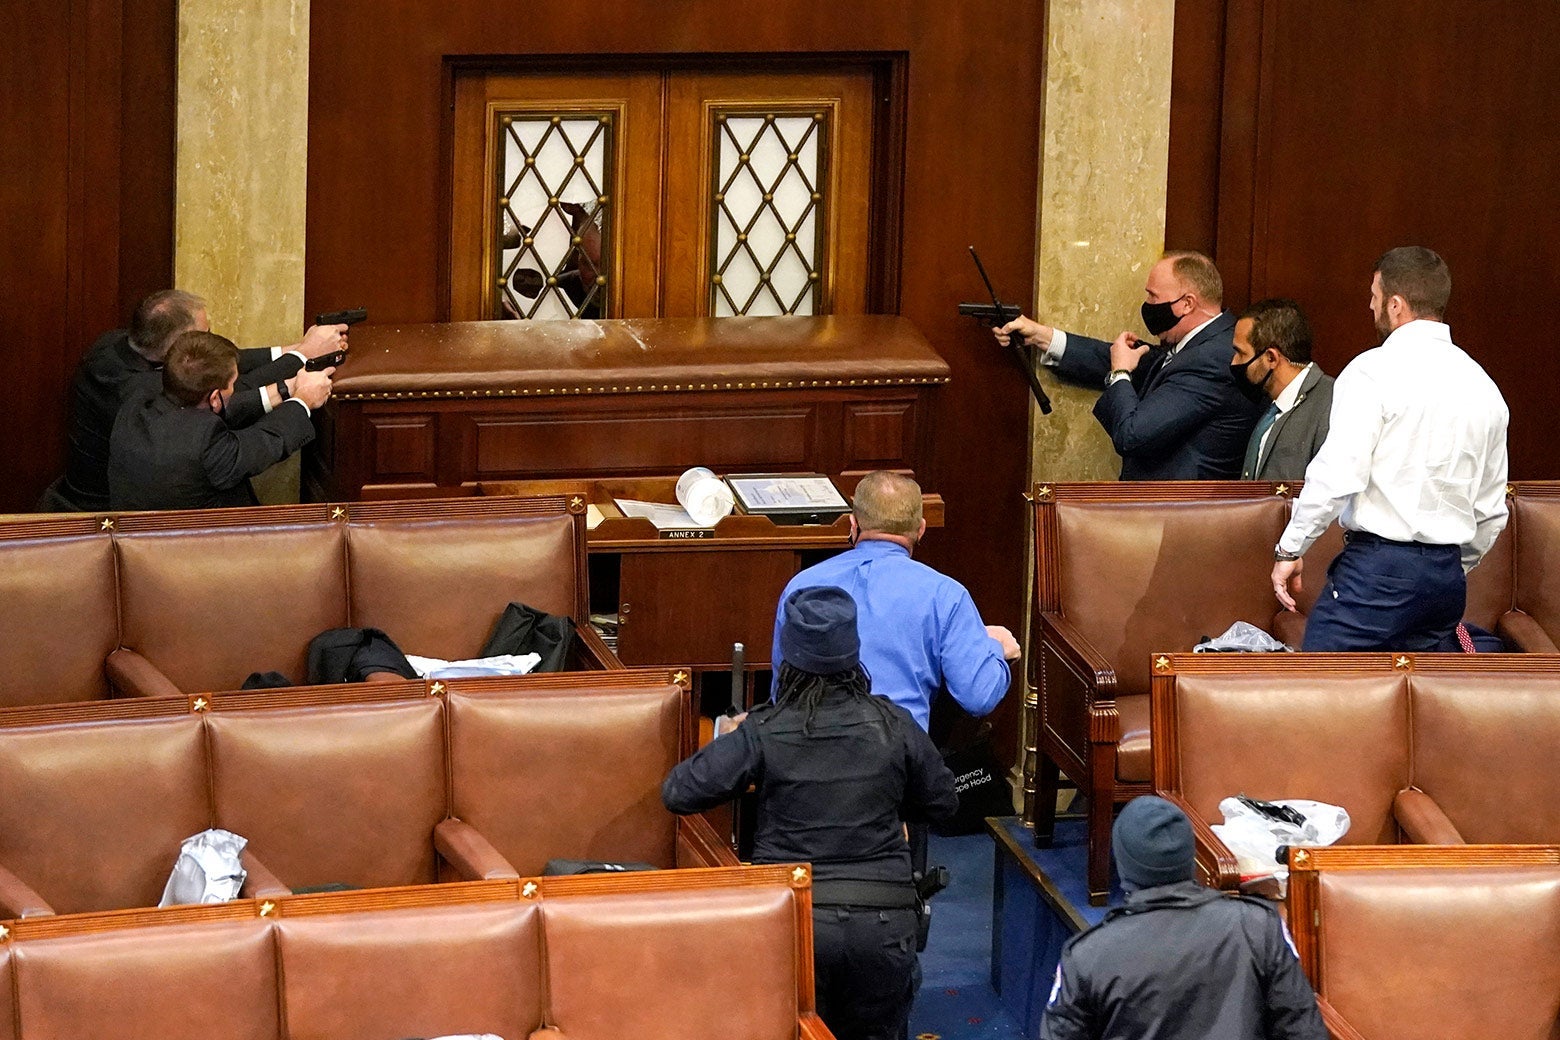 Three Capitol police officers inside the House Chamber point their gun at a door.